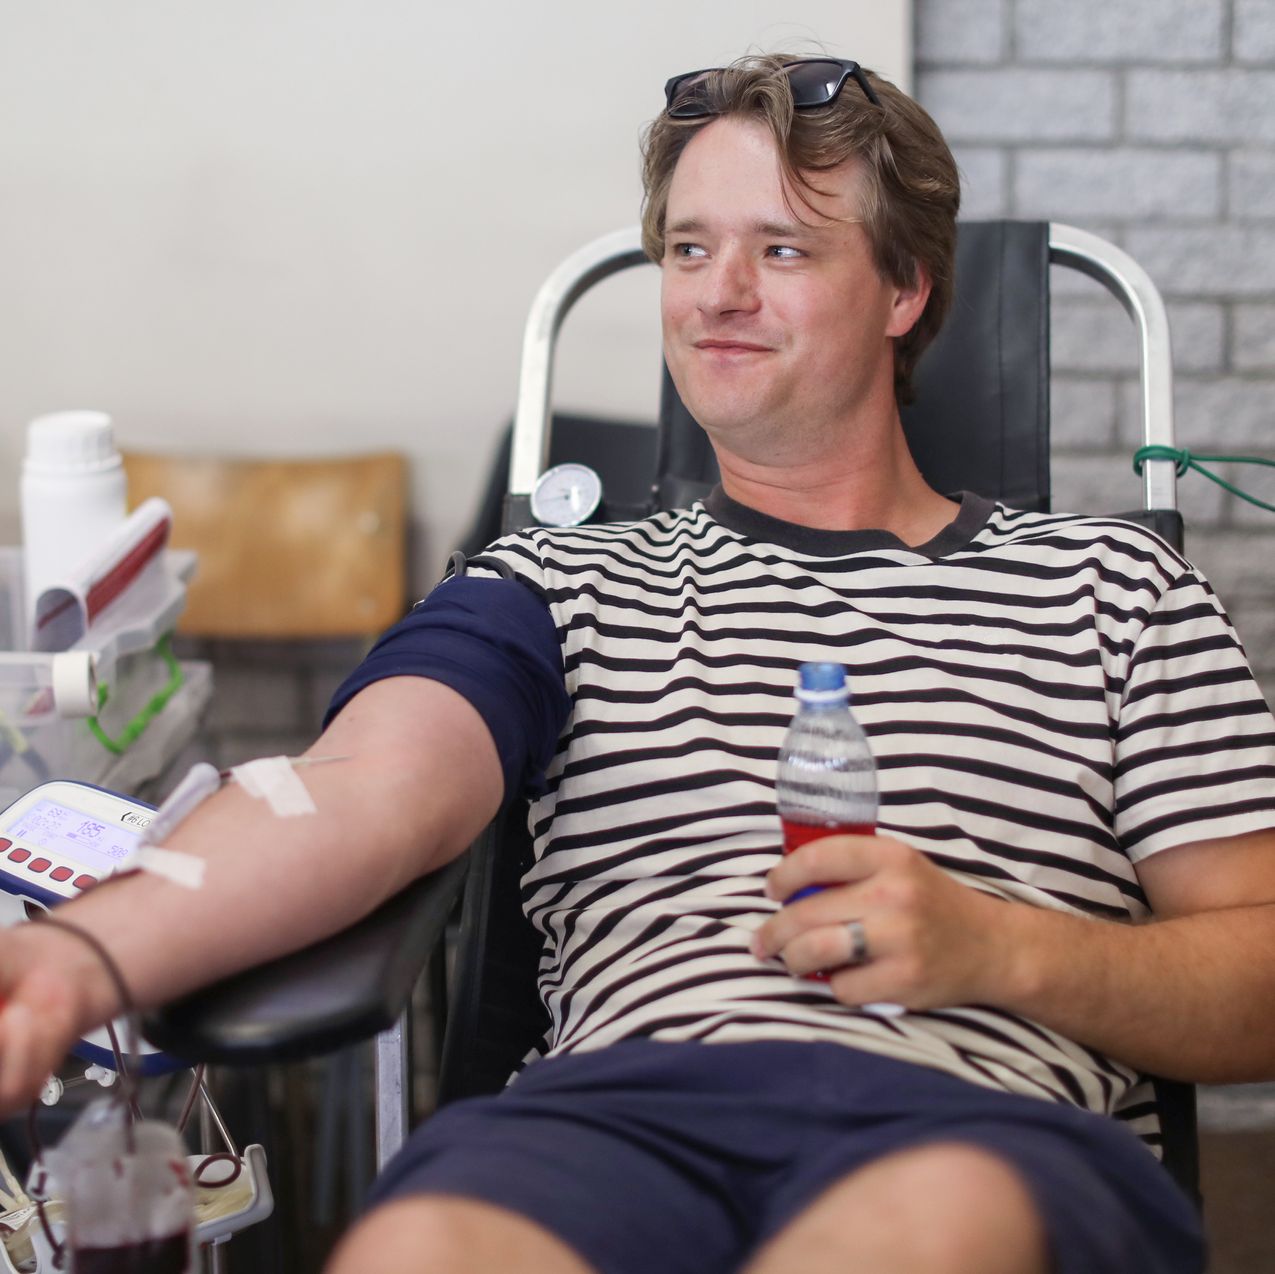 Gay Men May Be Eligible to Donate Blood Under New Guidelines